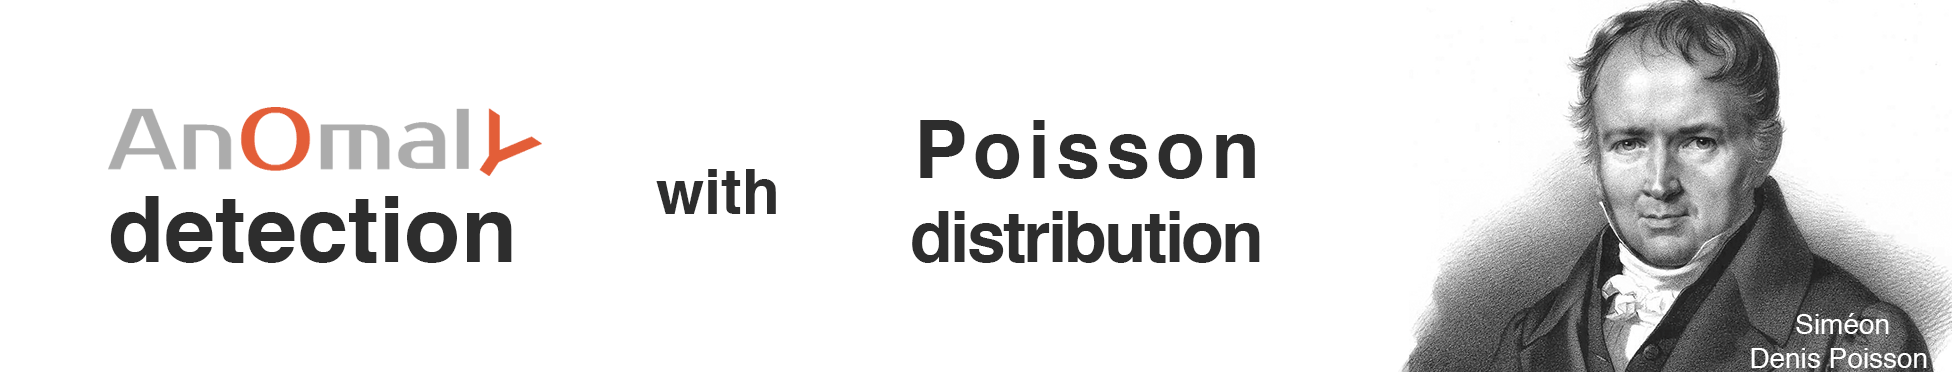 anomaly detection with poisson distribution